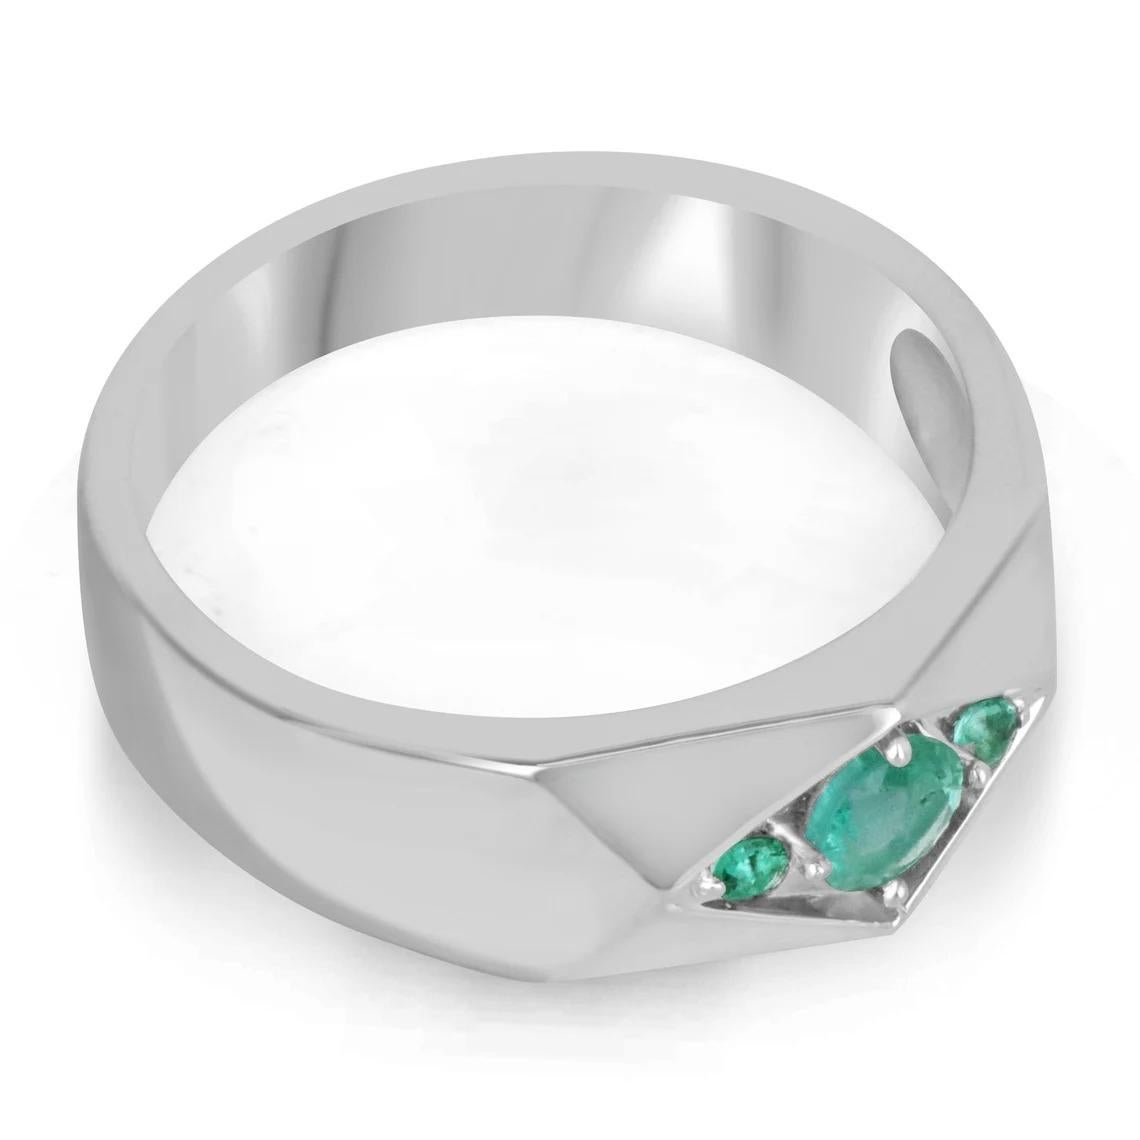 A dapper natural emerald men's ring that features three petite Asscher cut emeralds in the very center; creating a unique three-stone look that showcases vertically. Ideal for everyday use, and crafted in shiny sterling silver.

Setting Style: